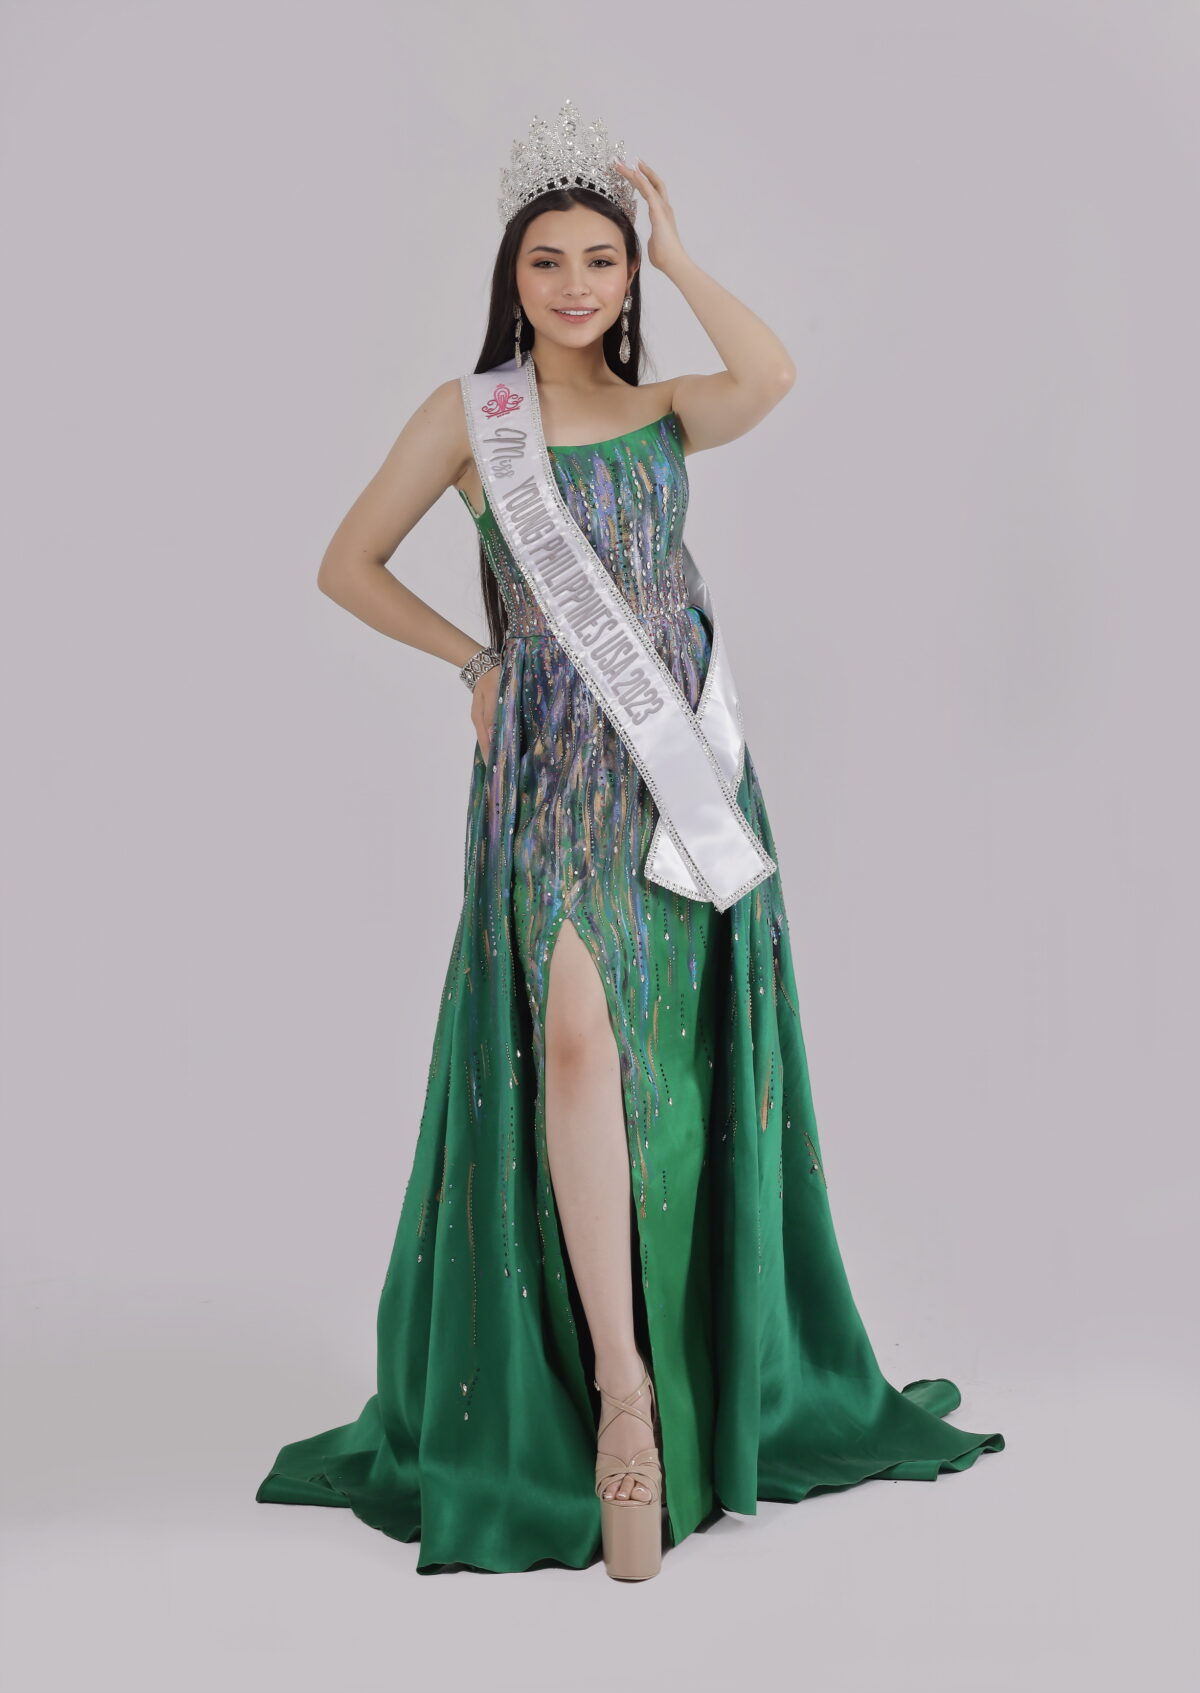 Kirra Abarintos- Miss Young Philippines USA 2023